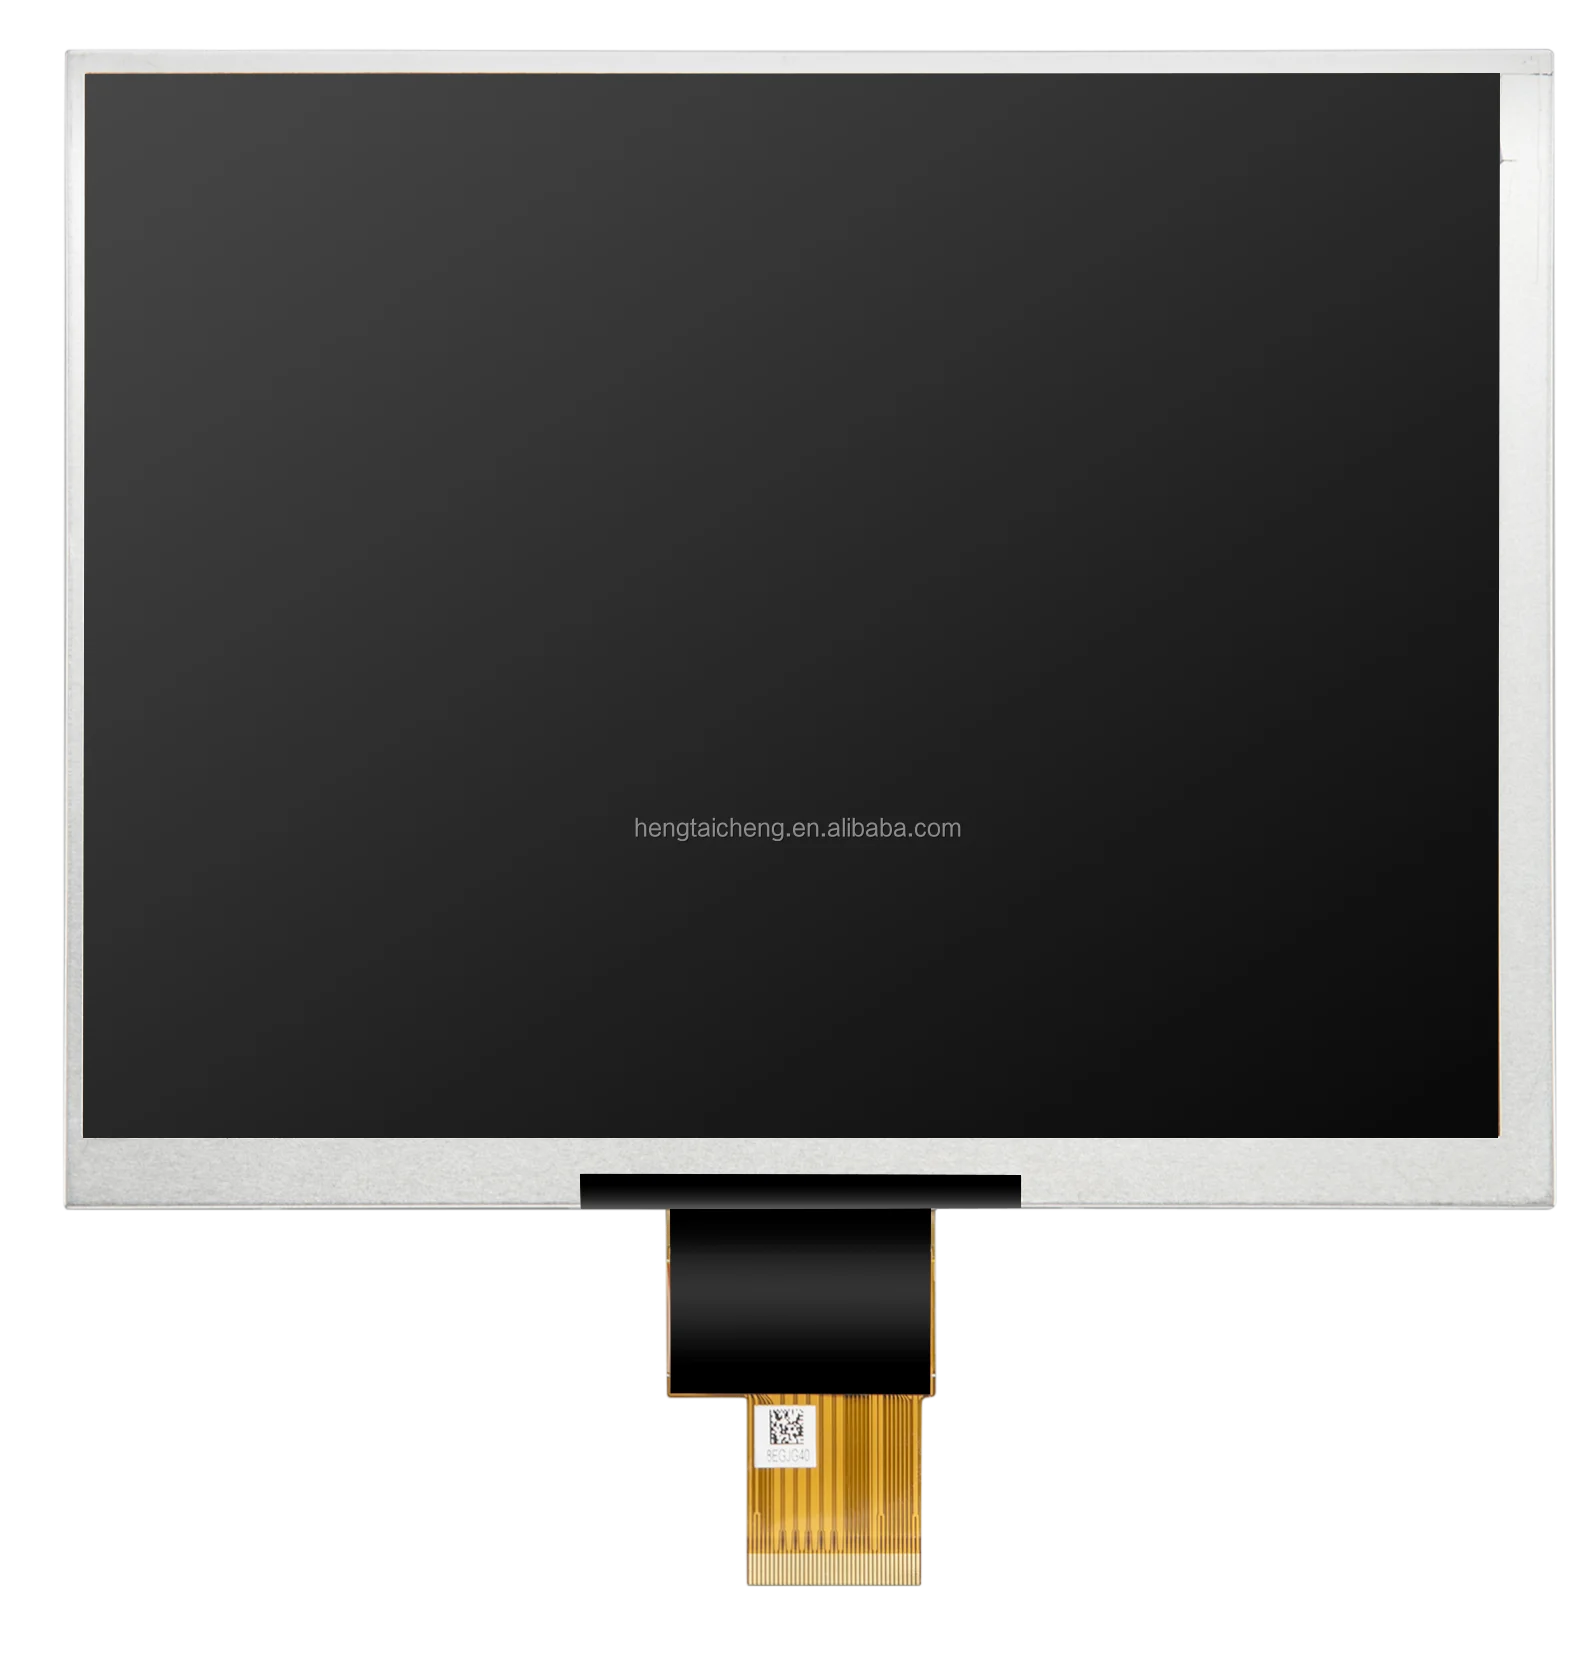 Ips Panel 1024 768 Resolution Xga Wide Viewing Angle 2 5mm Thickness 8inch Tft Lcd Module For Tablet Advertising Buy 8 0 Inch Lcd Panel Screens Display Module Lcd Monitor Xga Resolution Rgb Product On Alibaba Com